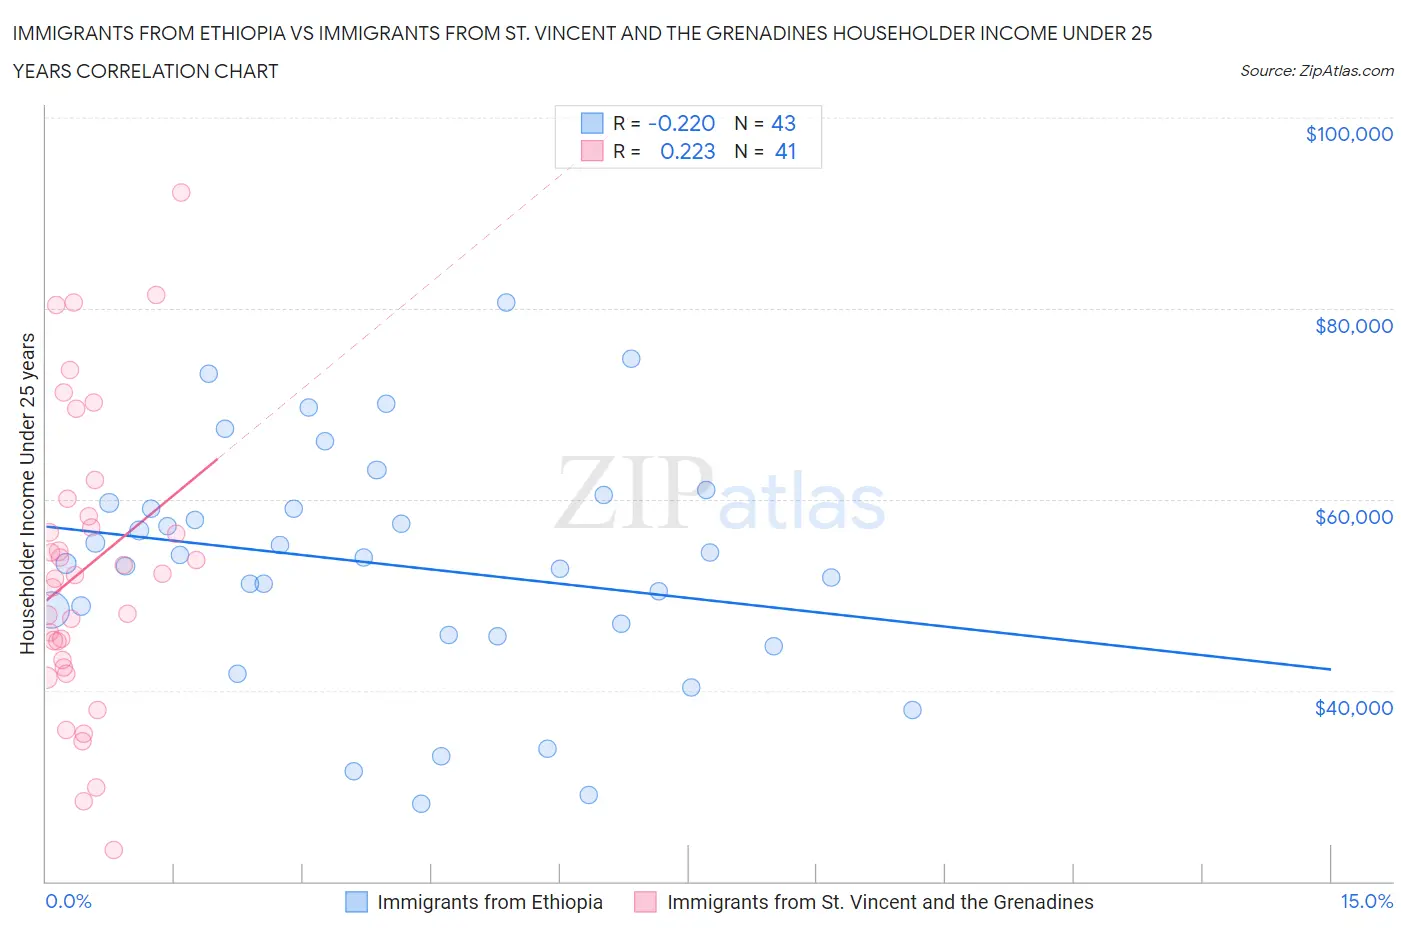 Immigrants from Ethiopia vs Immigrants from St. Vincent and the Grenadines Householder Income Under 25 years